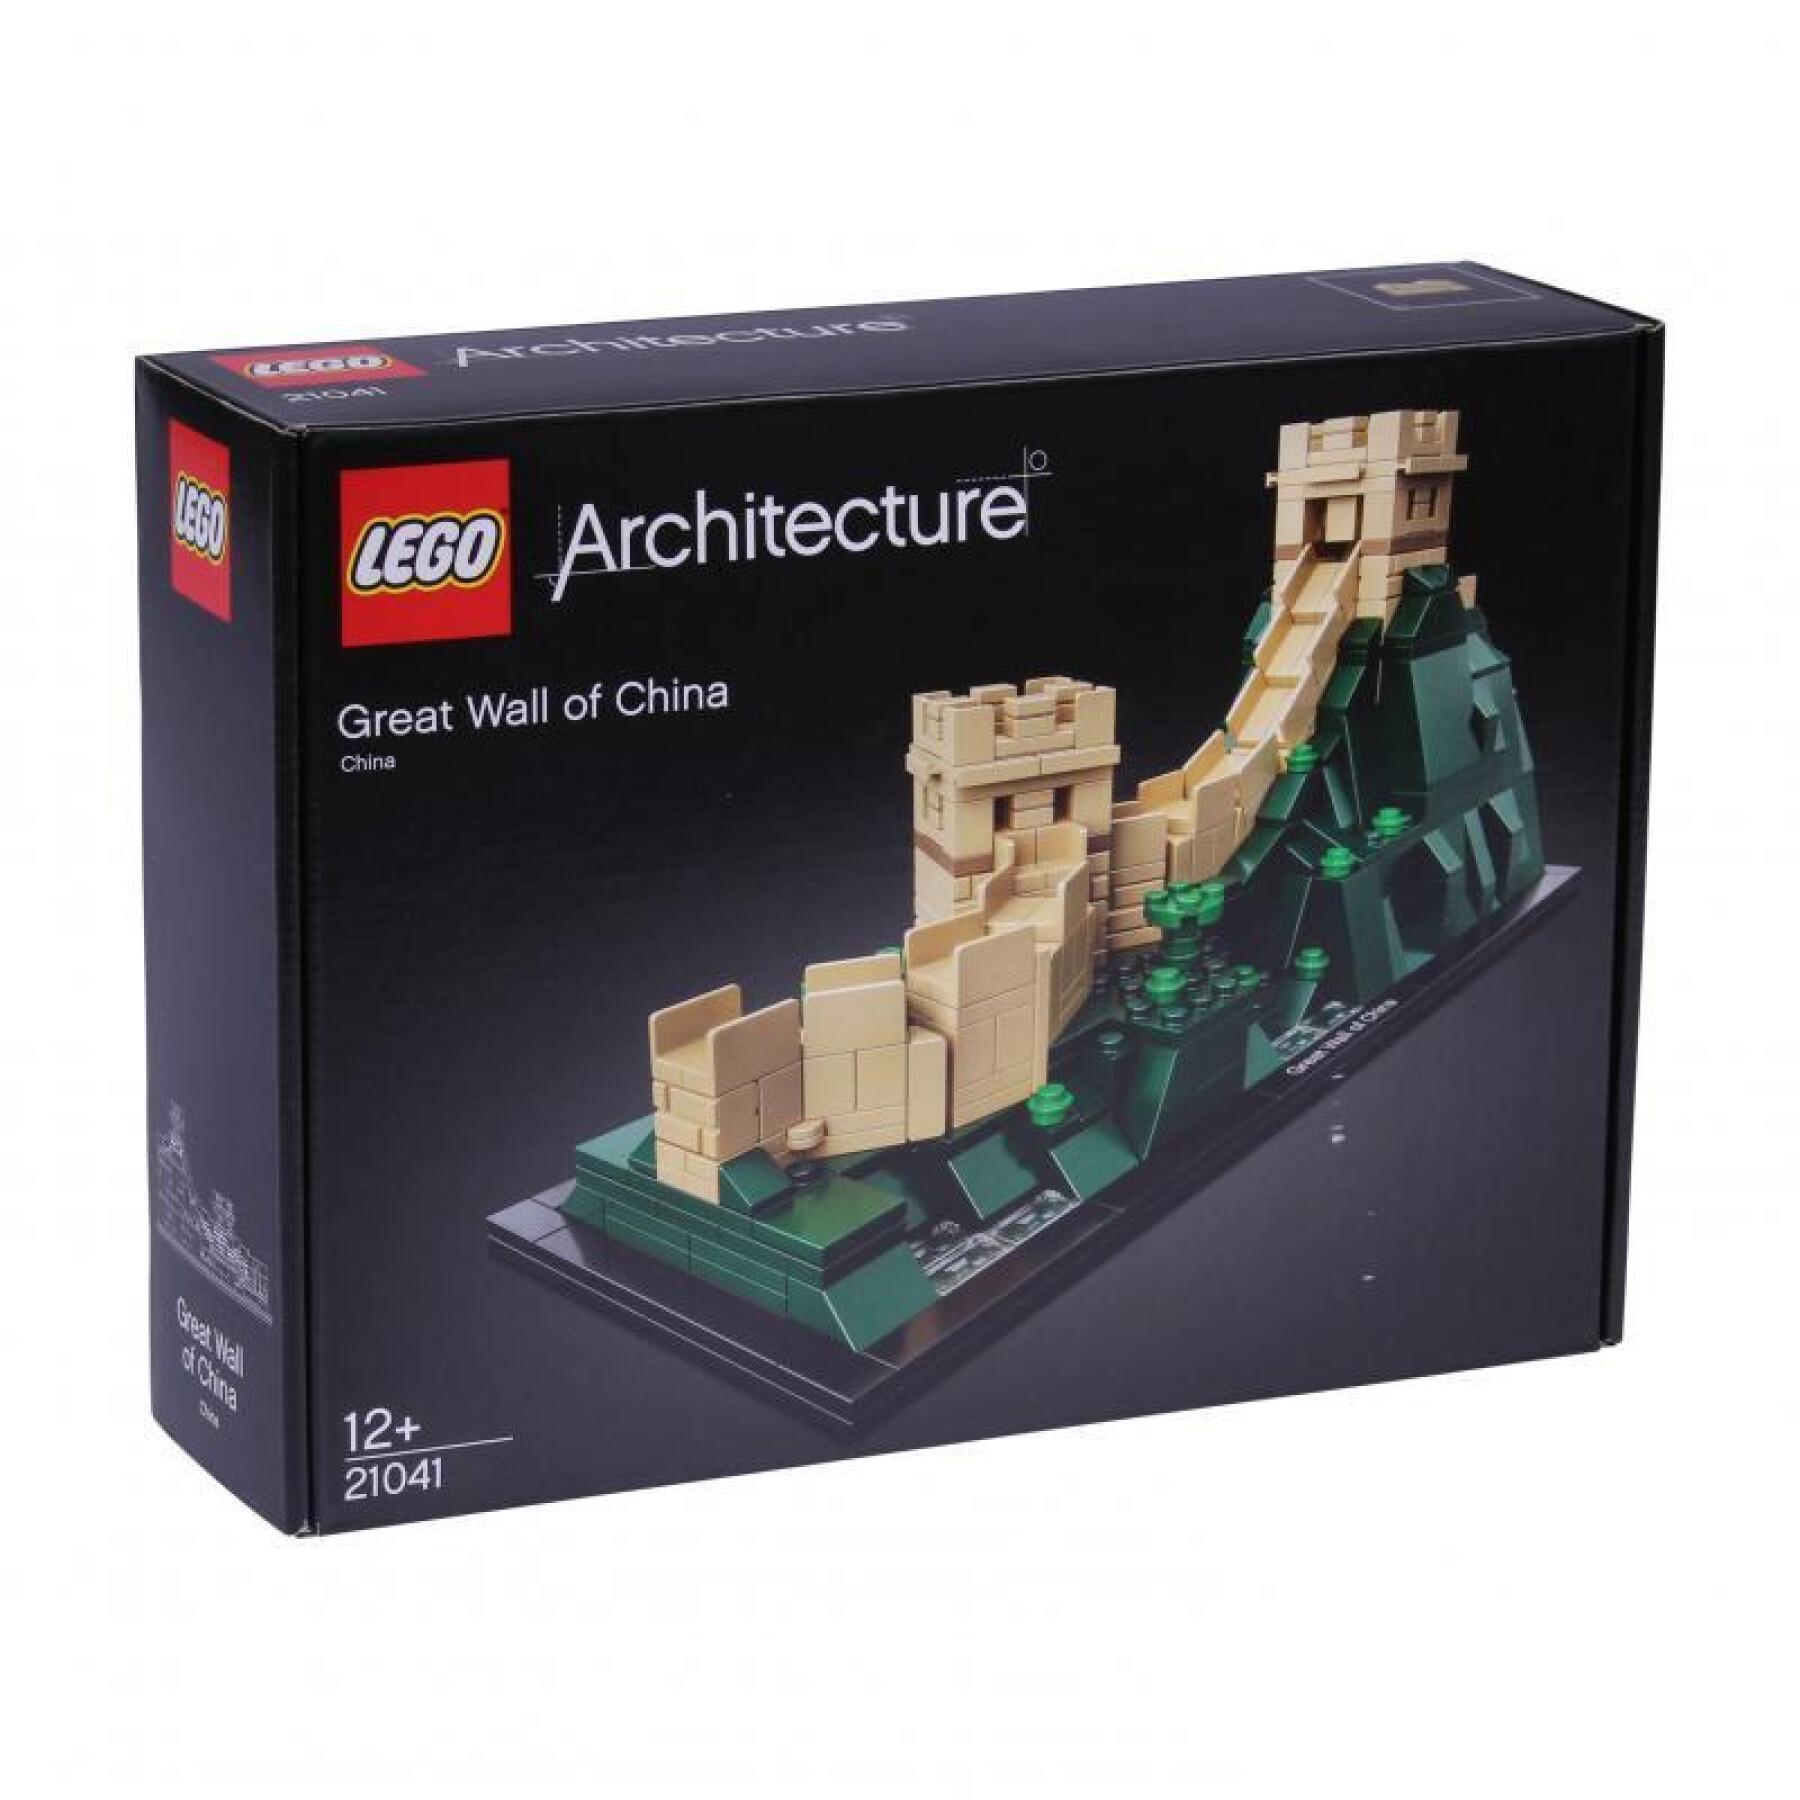 Early-learning games Lego 21041